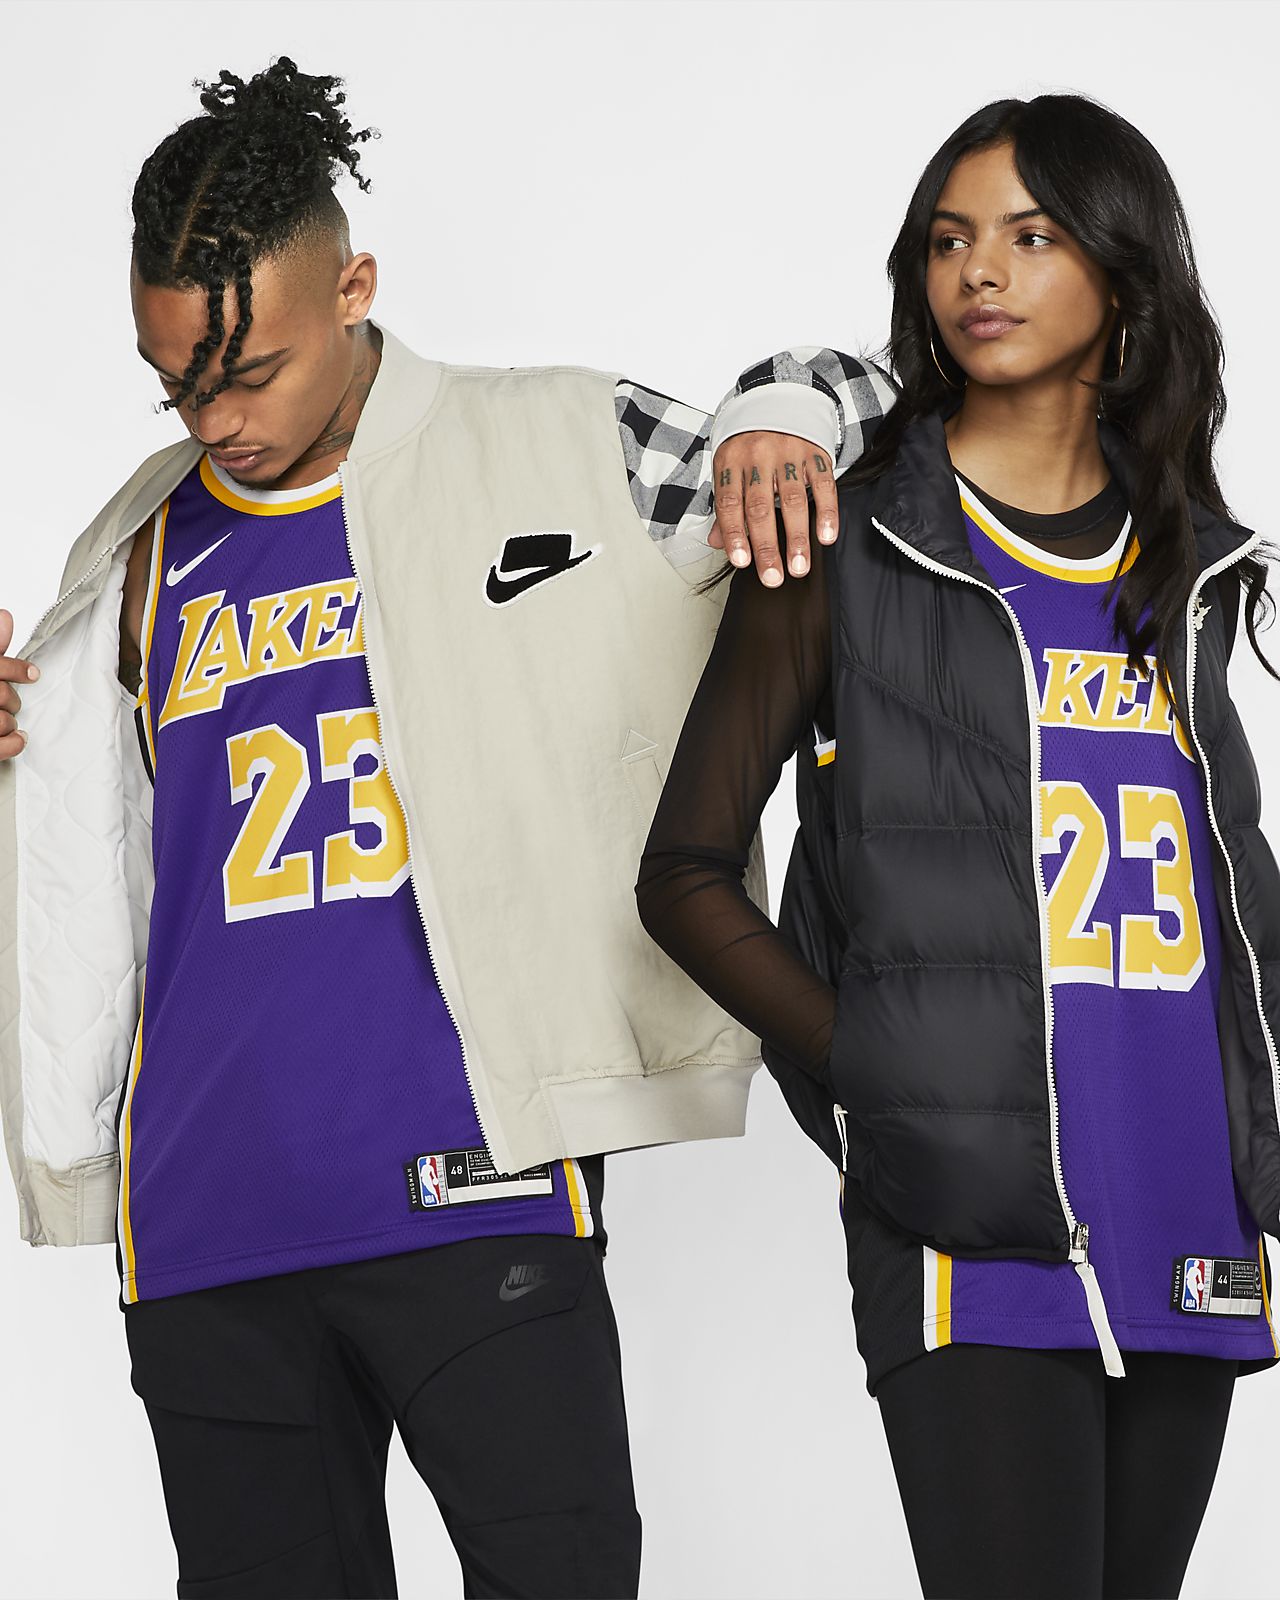 lakers jersey female